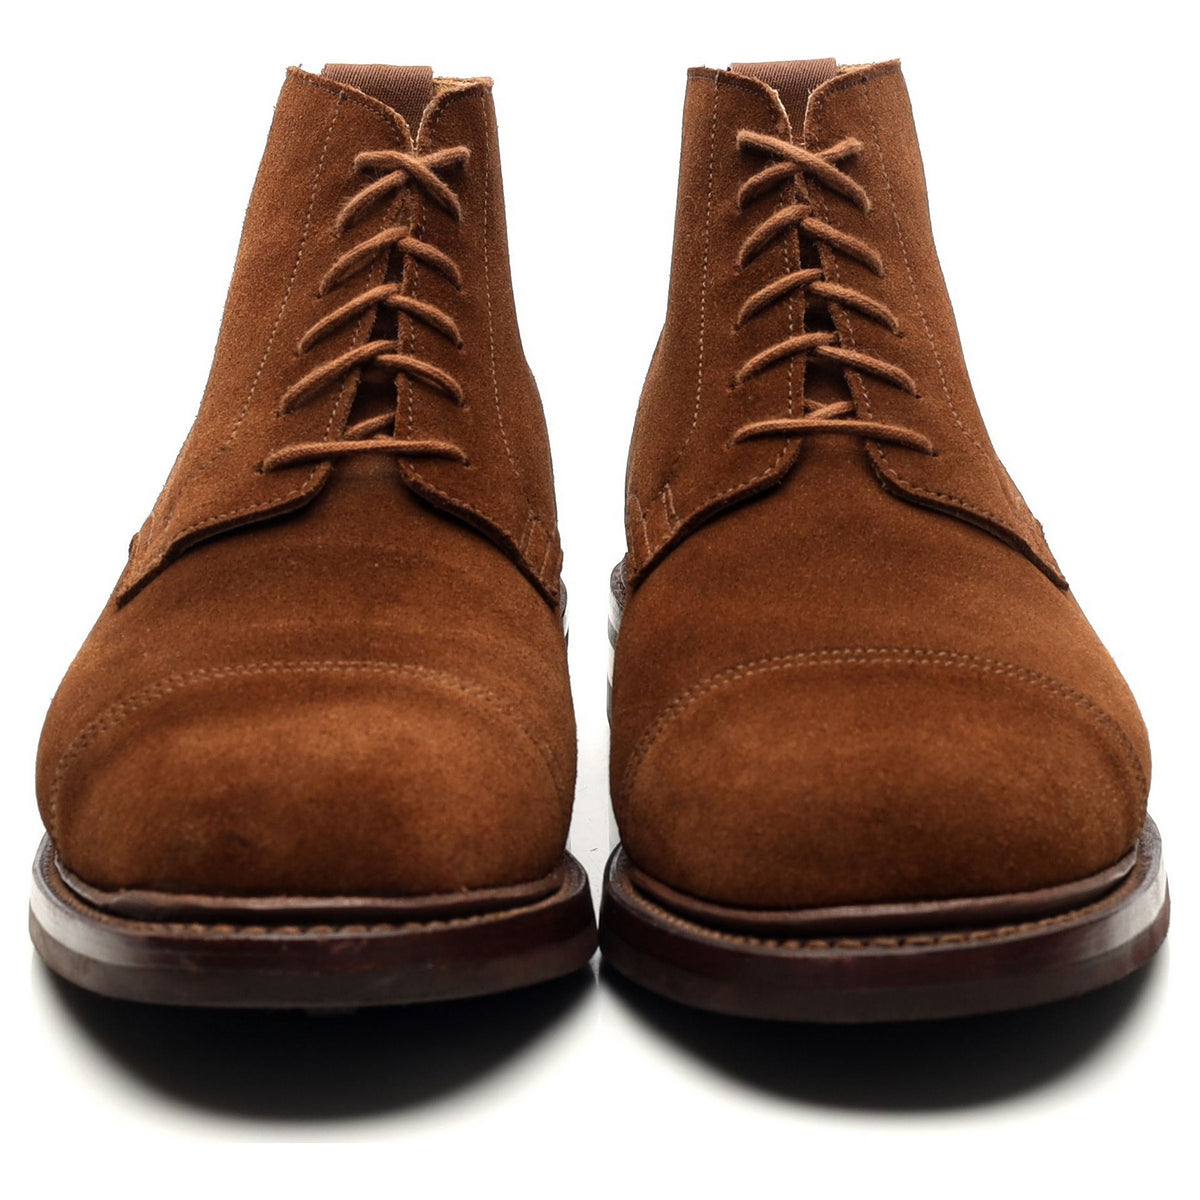 &#39;Humber&#39; Snuff Brown Suede Boots UK 7 E